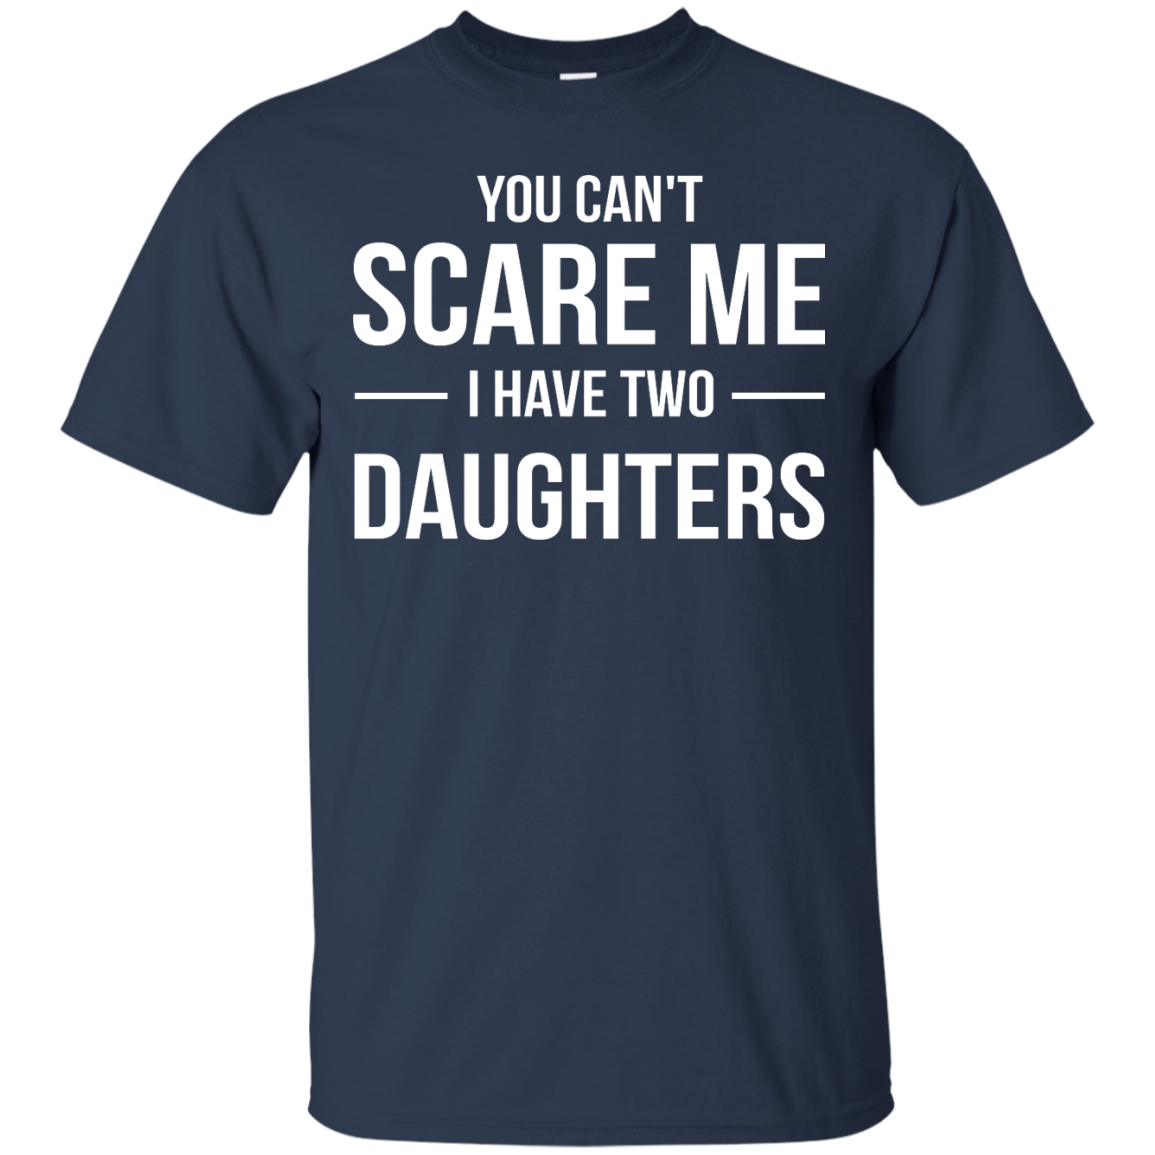 You Can't Scare Me I Have Two Daughters shirt, tank, sweater